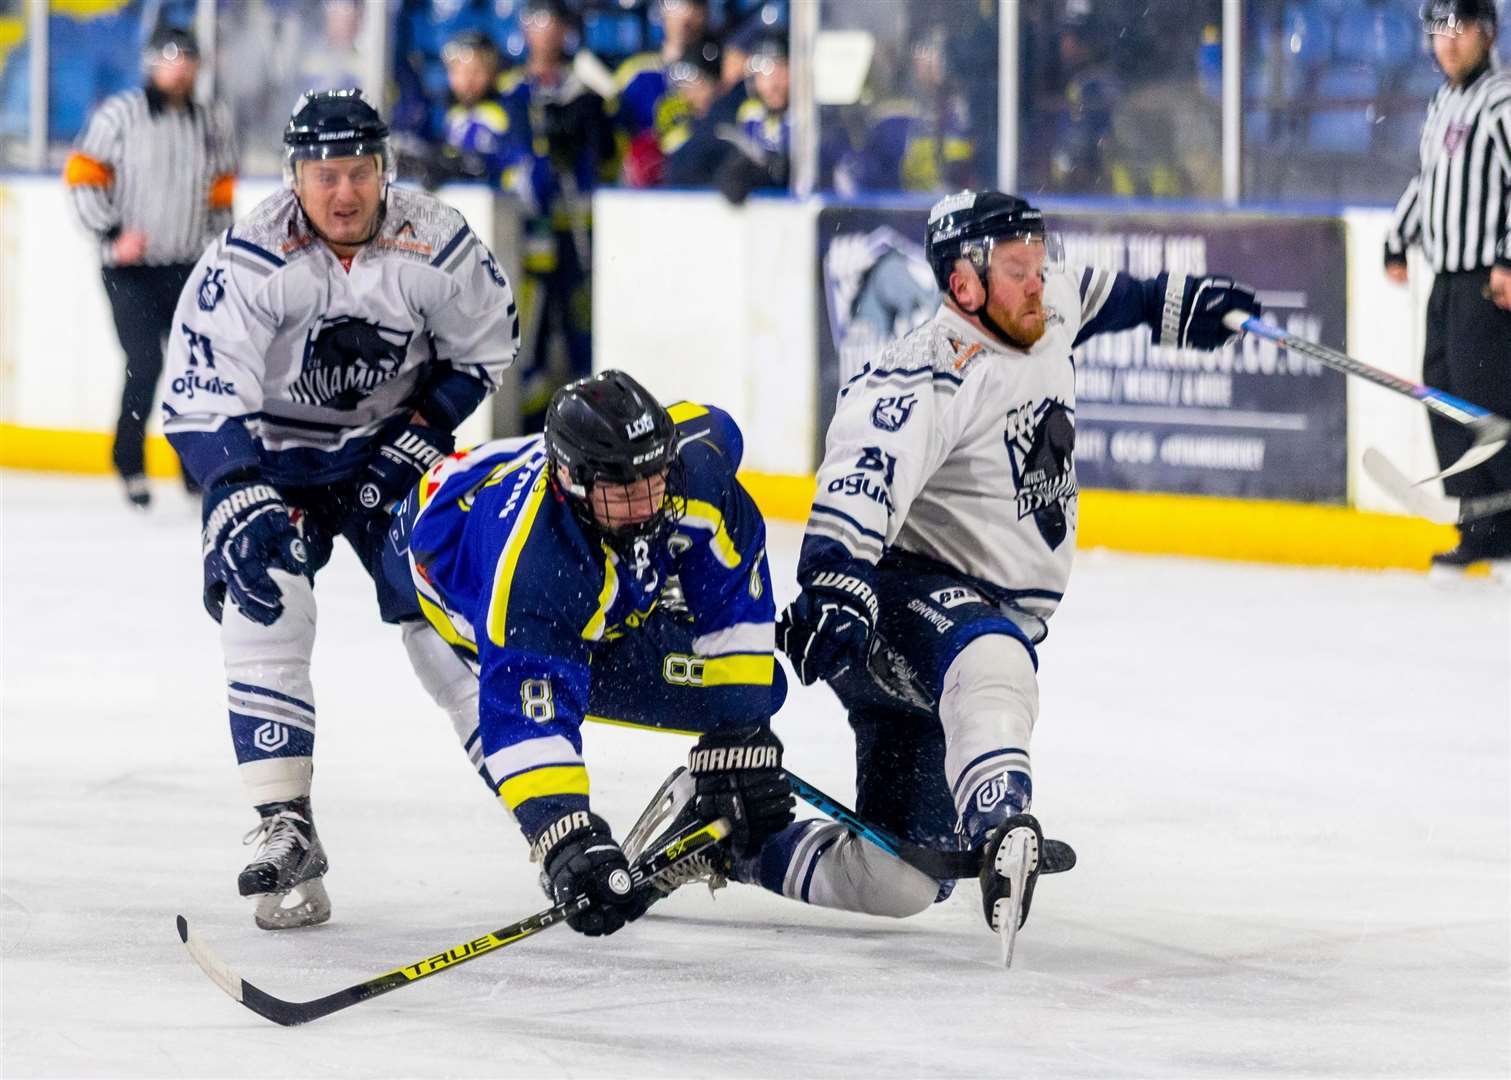 Tom Long (left) and Aaron Strawson (right) stop the Oxford attack as Invicta Dynamos win convincingly Picture: David Trevallion